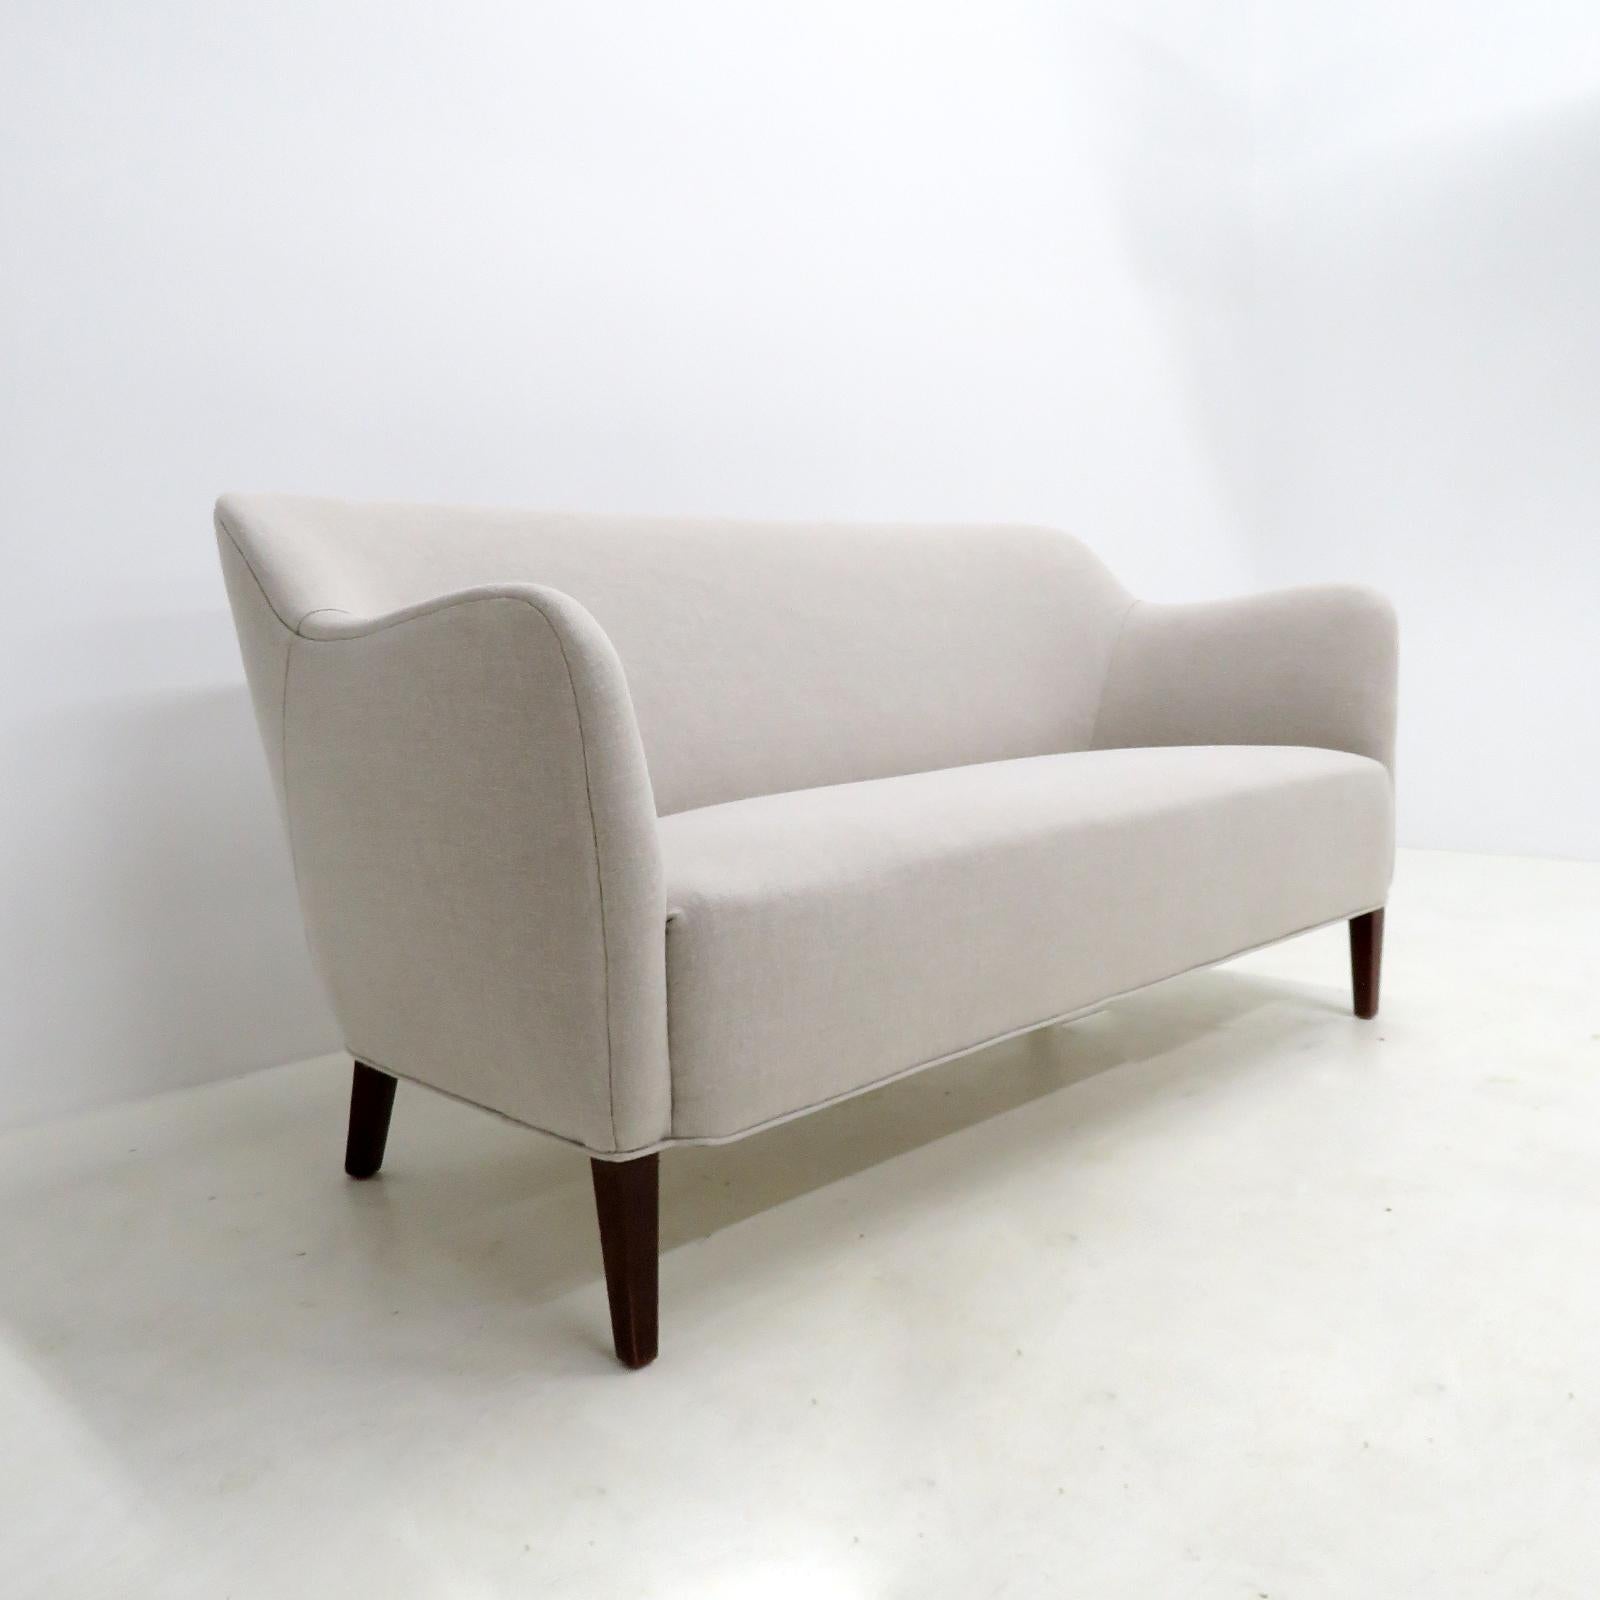 Stained Danish Modern Settee by Jacob Kjaer, 1940